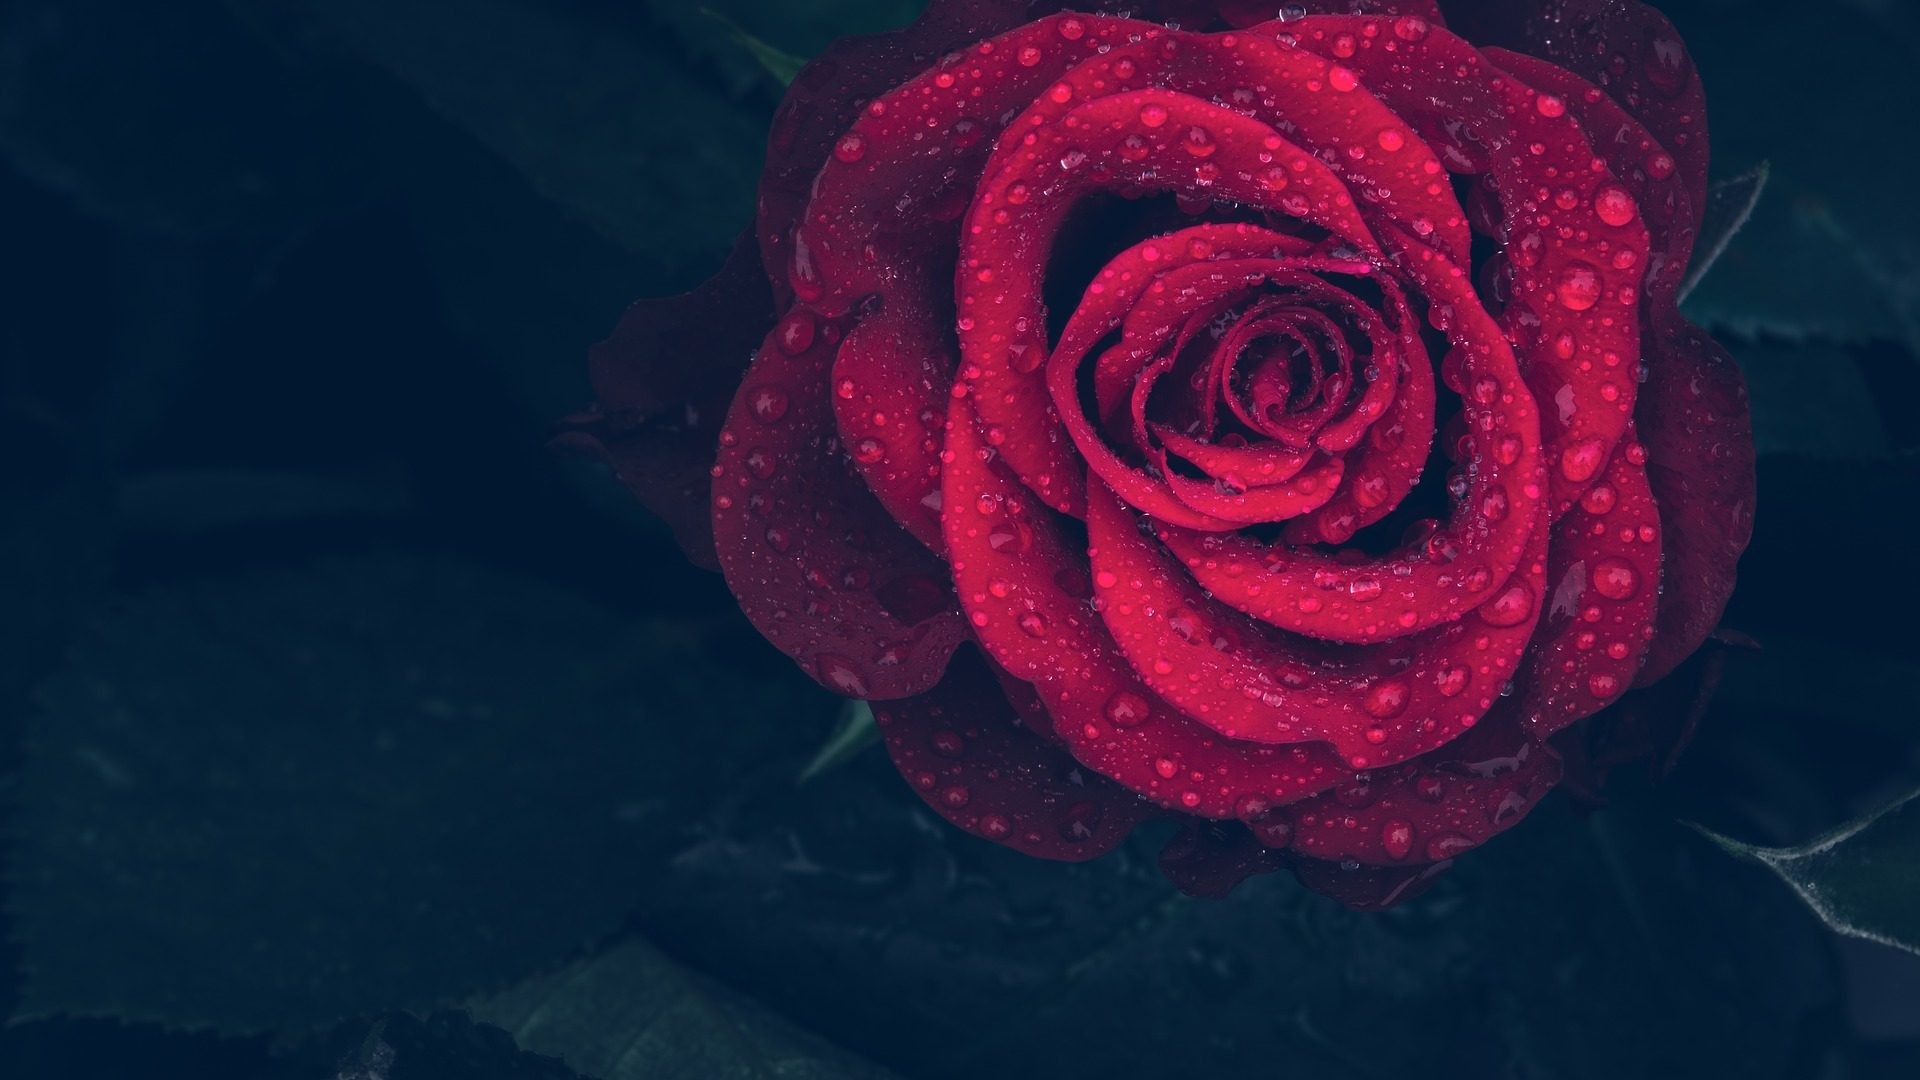 1920x1080 Beautiful single red rose hd wallpaper with dark background